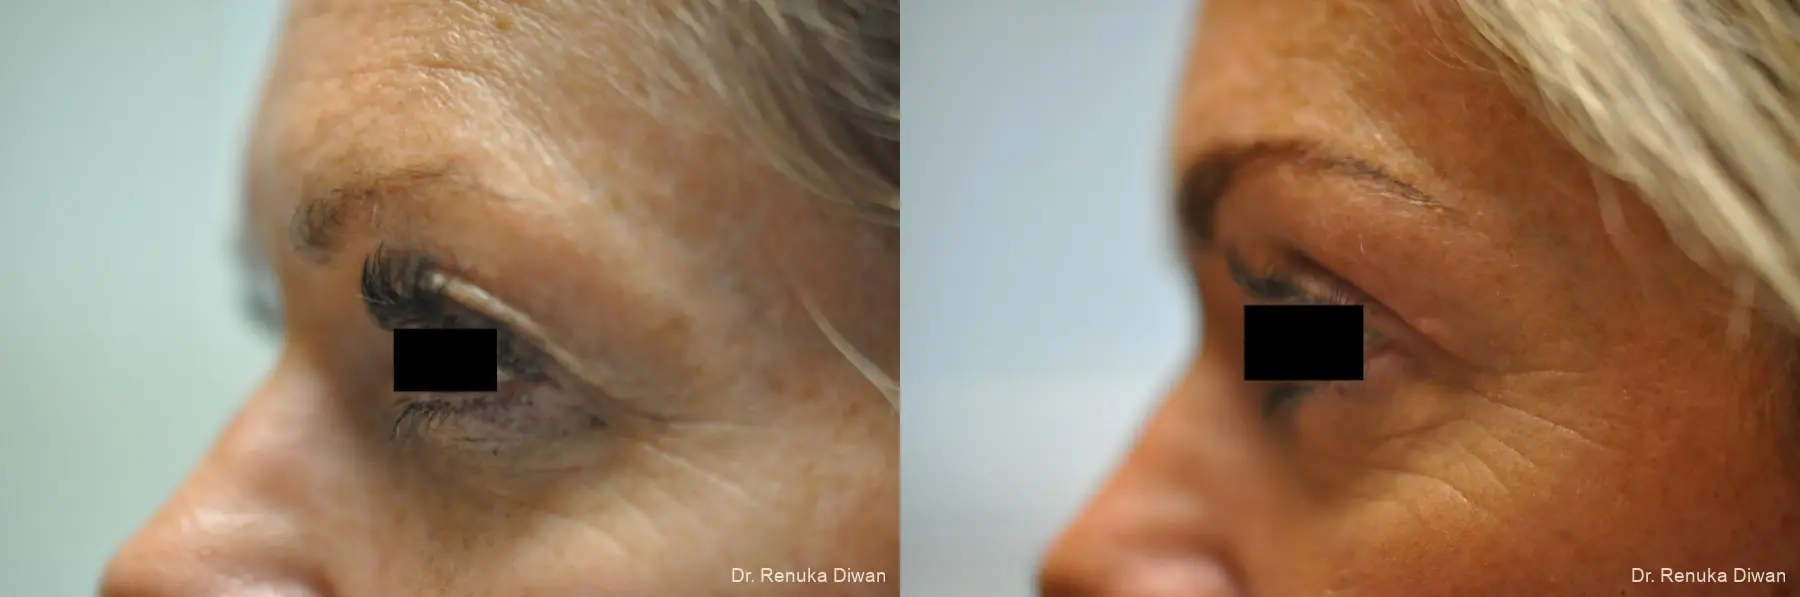 Blepharoplasty: Patient 1 - Before and After 1